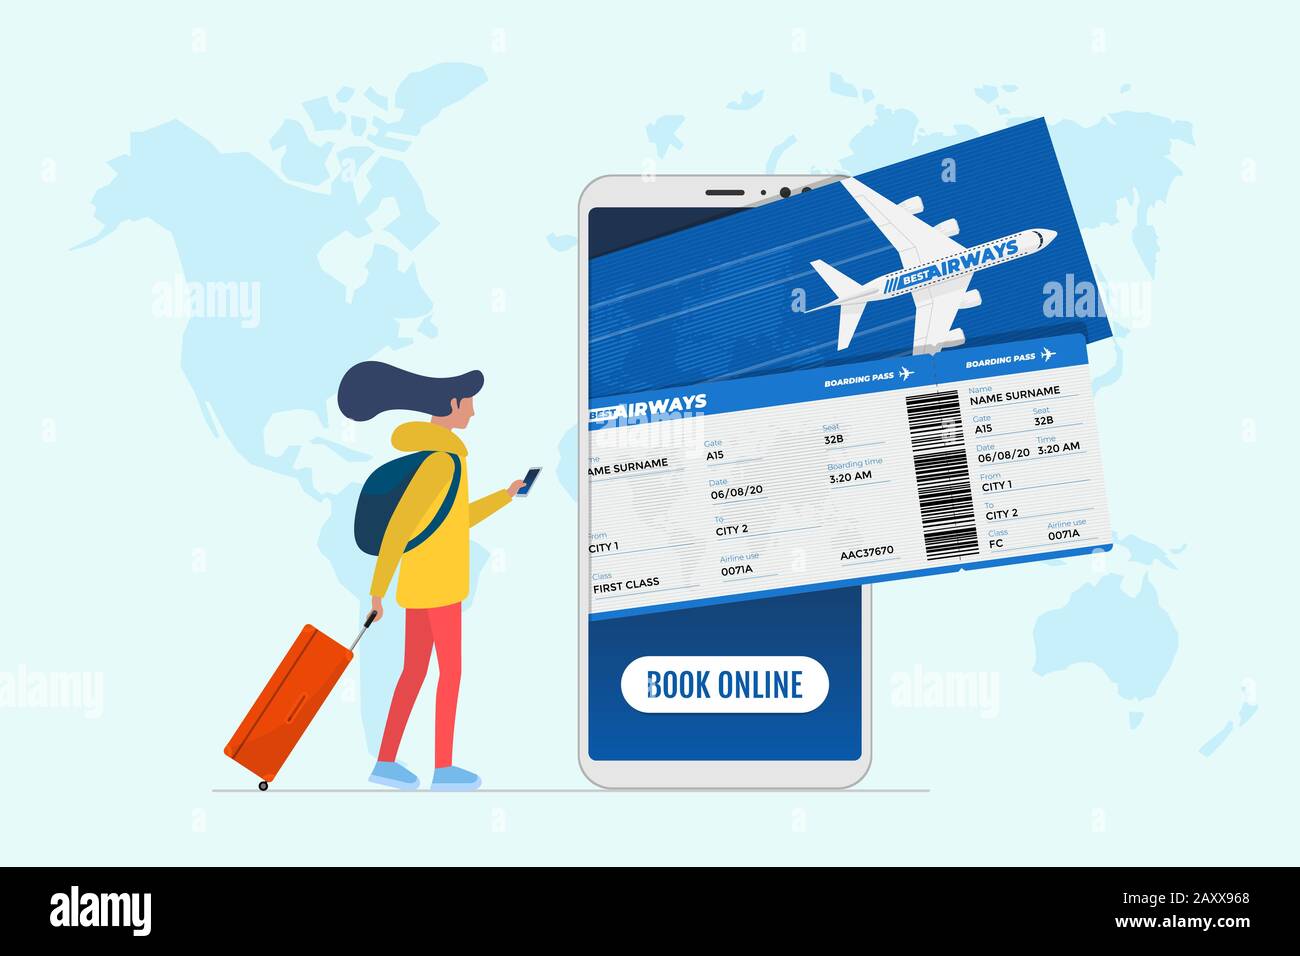 Online flight booking service concept. Young female tourist with suitcase luggage book airplane travel on smartphone. Plane ticket reservation and pay mobile app on world map vector illustration Stock Vector